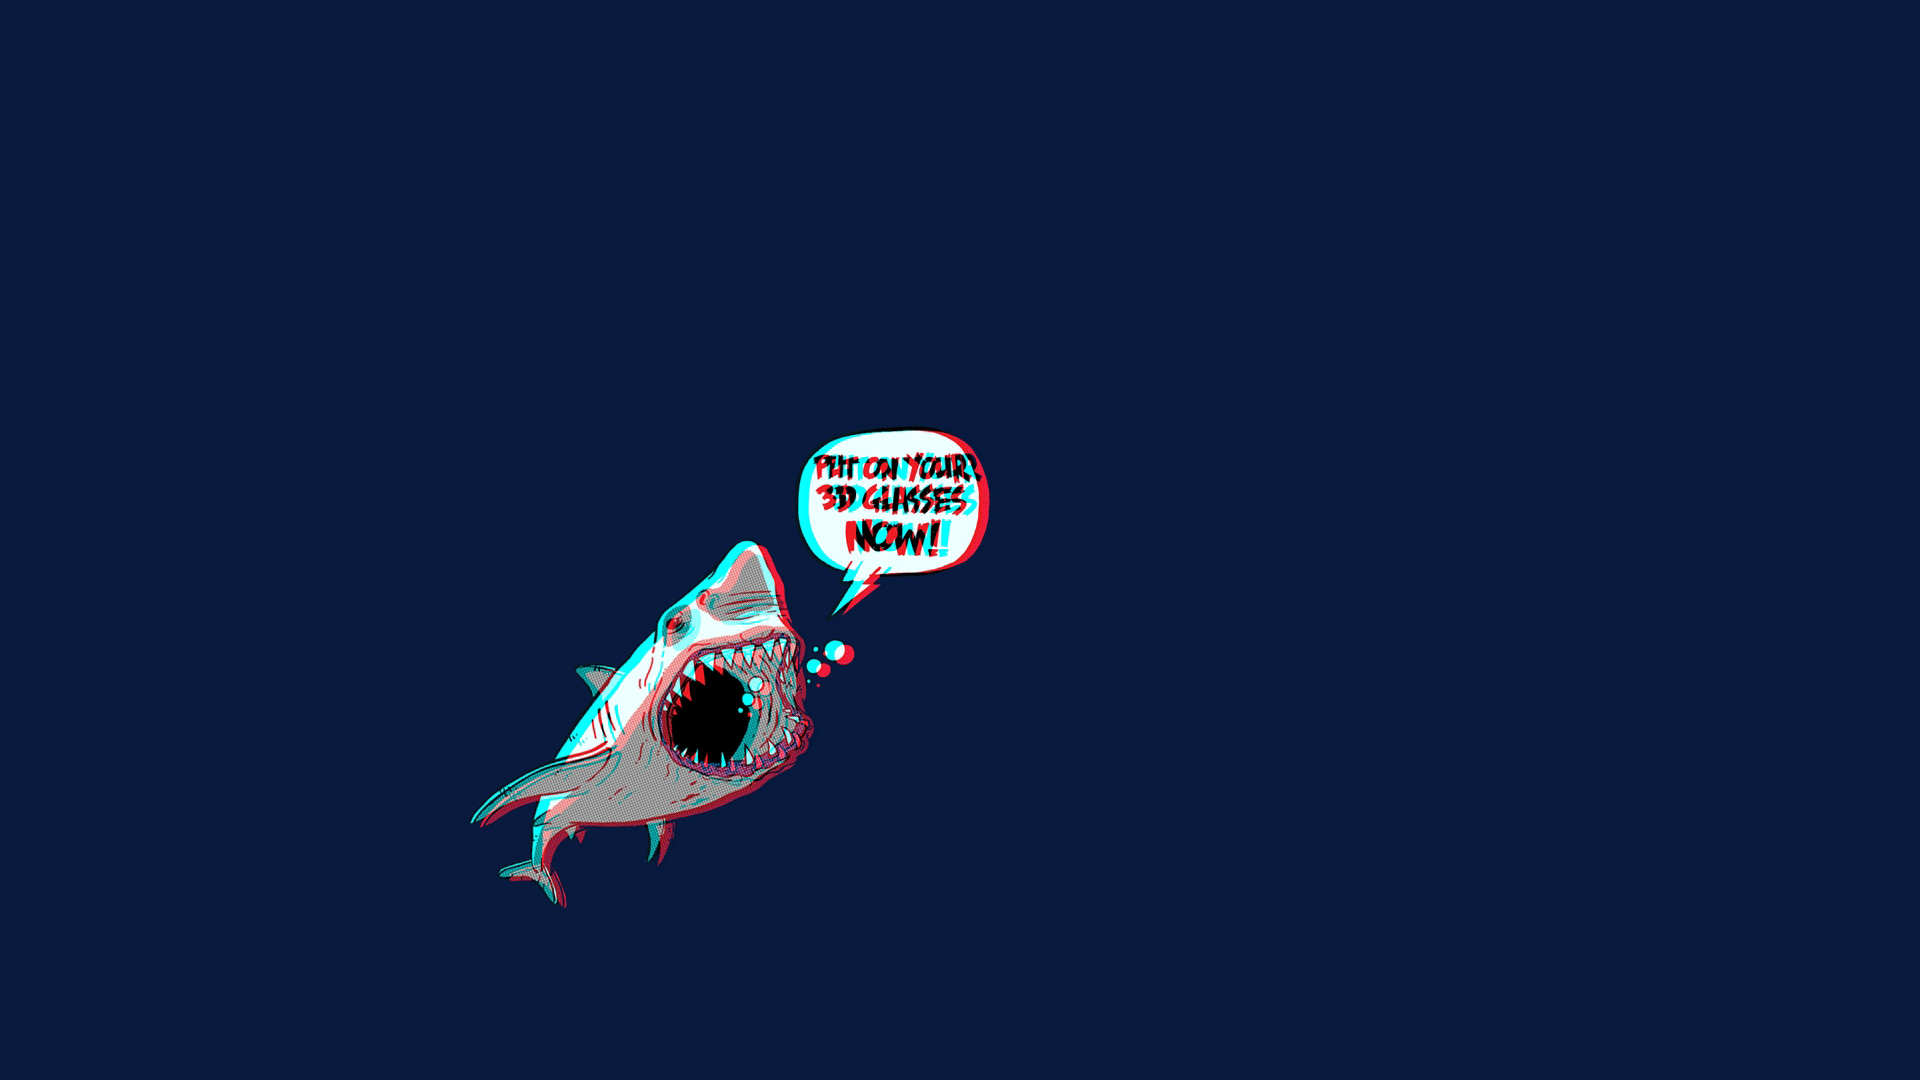 3D view, funny, sharks - HD Wallpaper View, Resize and Free Download /  